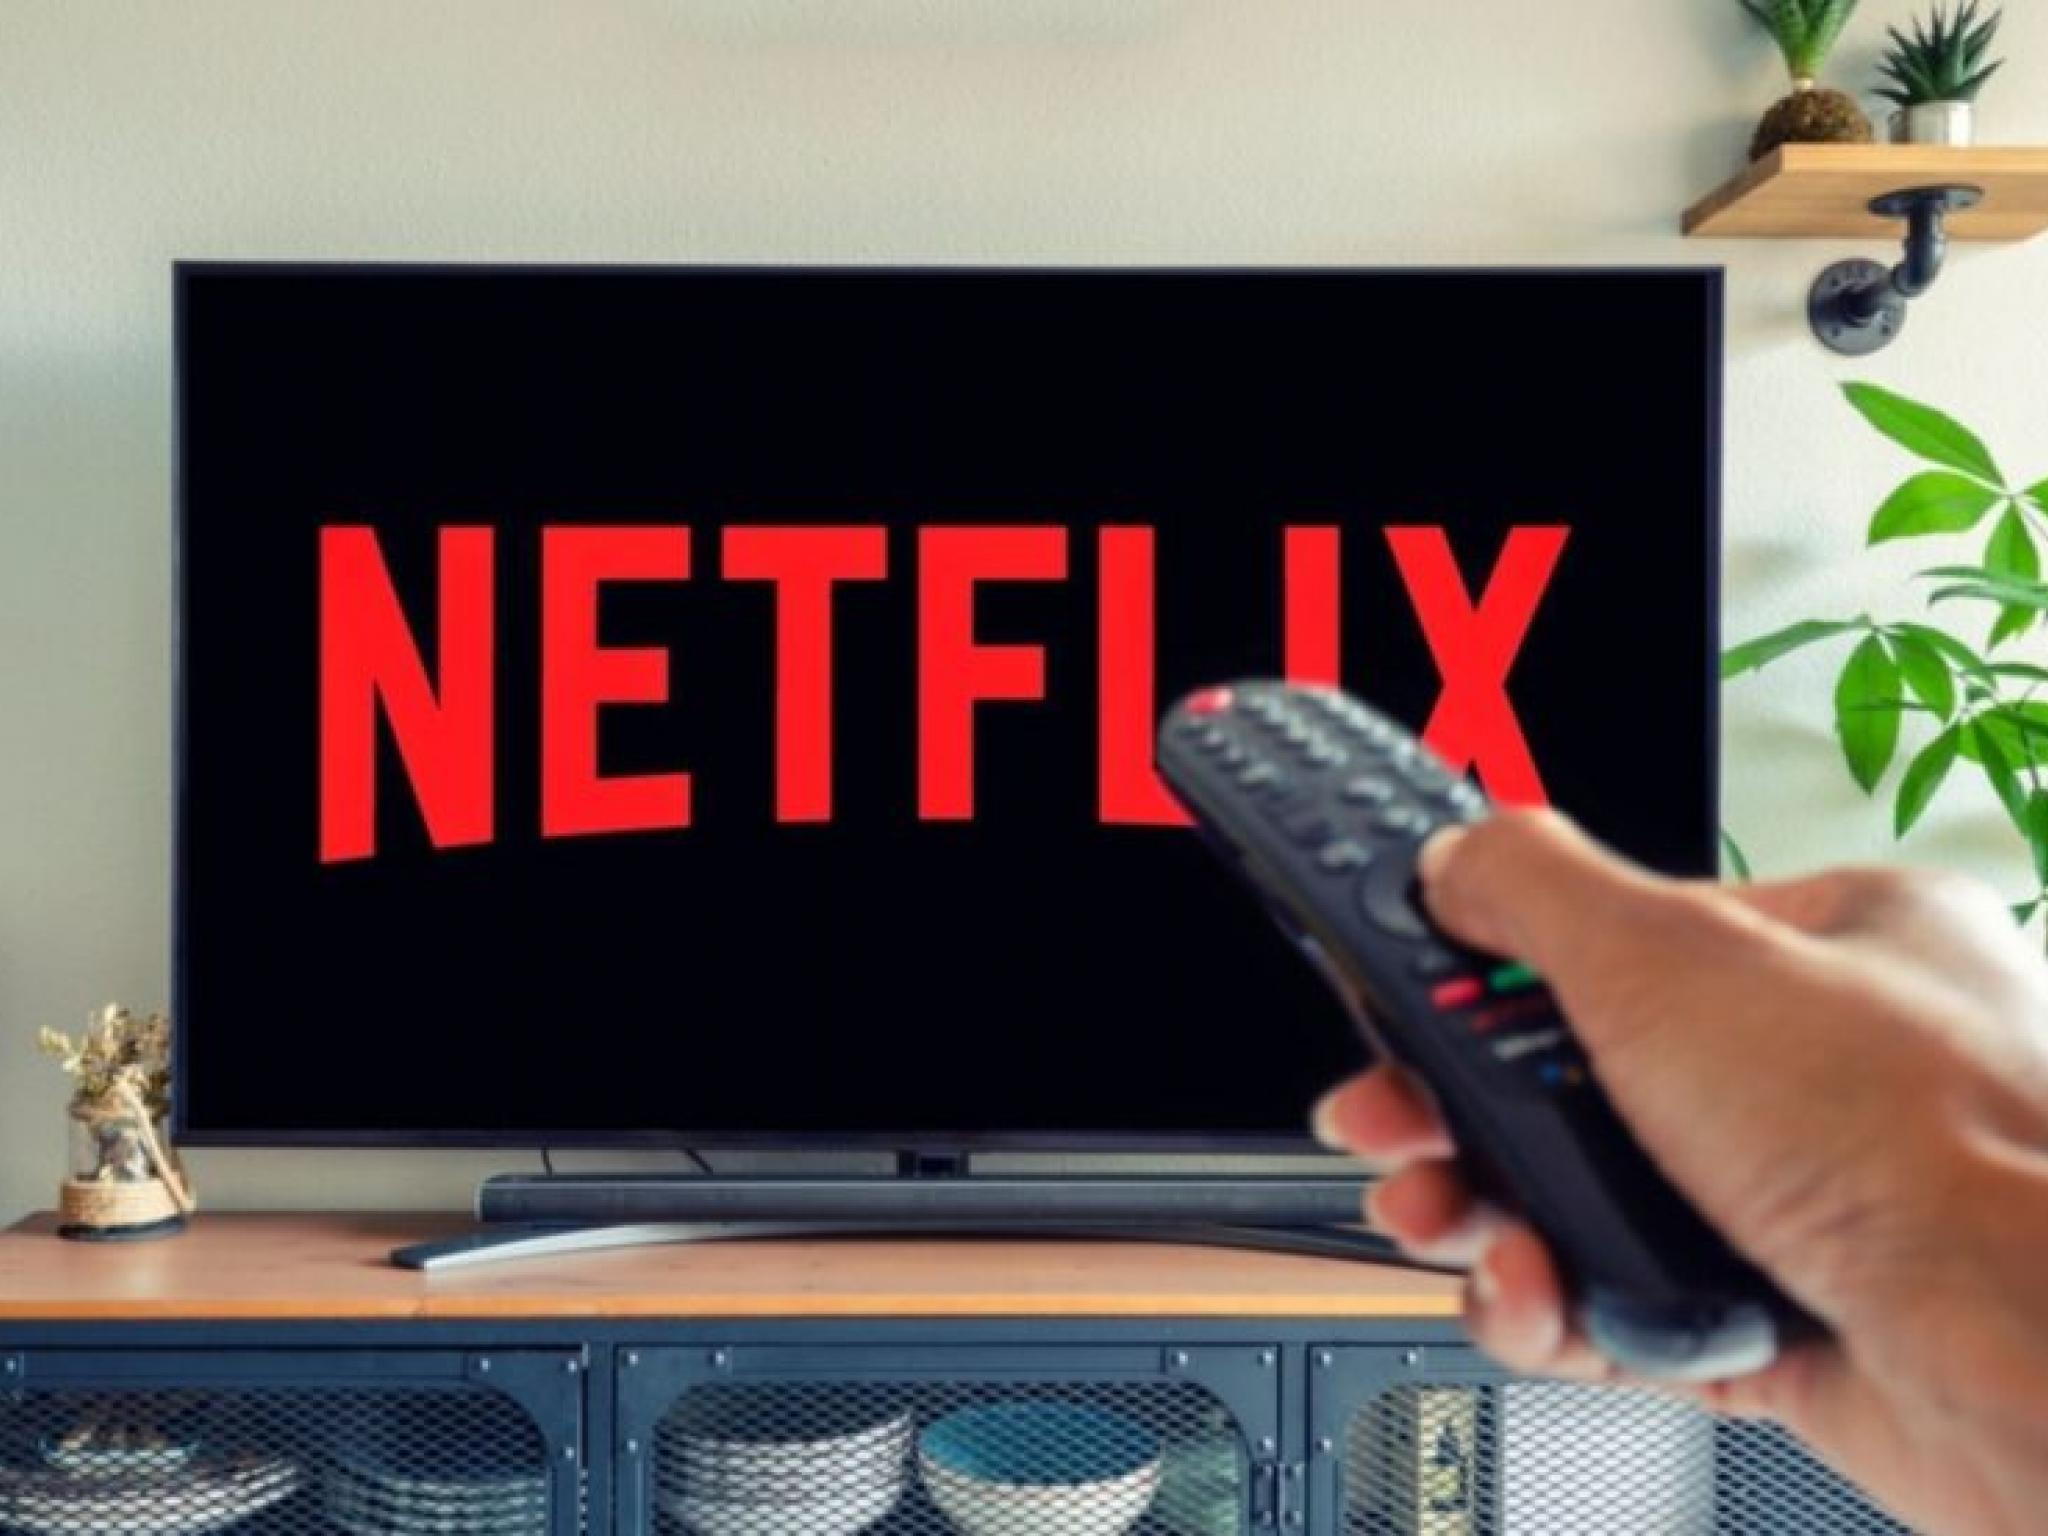  netflix-to-rally-over-13-here-are-10-top-analyst-forecasts-for-tuesday 